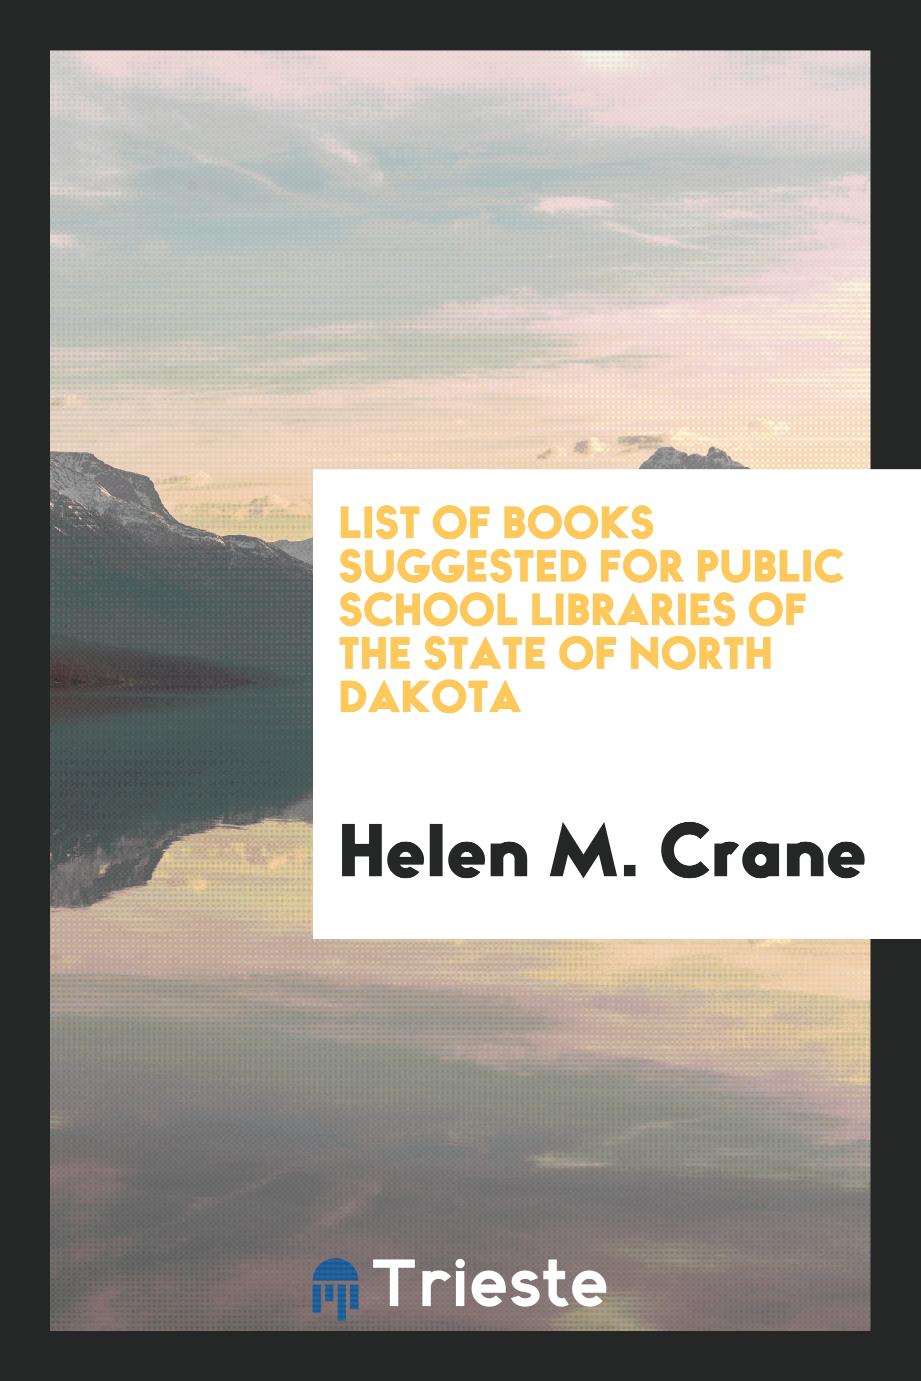 List of books suggested for public school libraries of the State of North Dakota